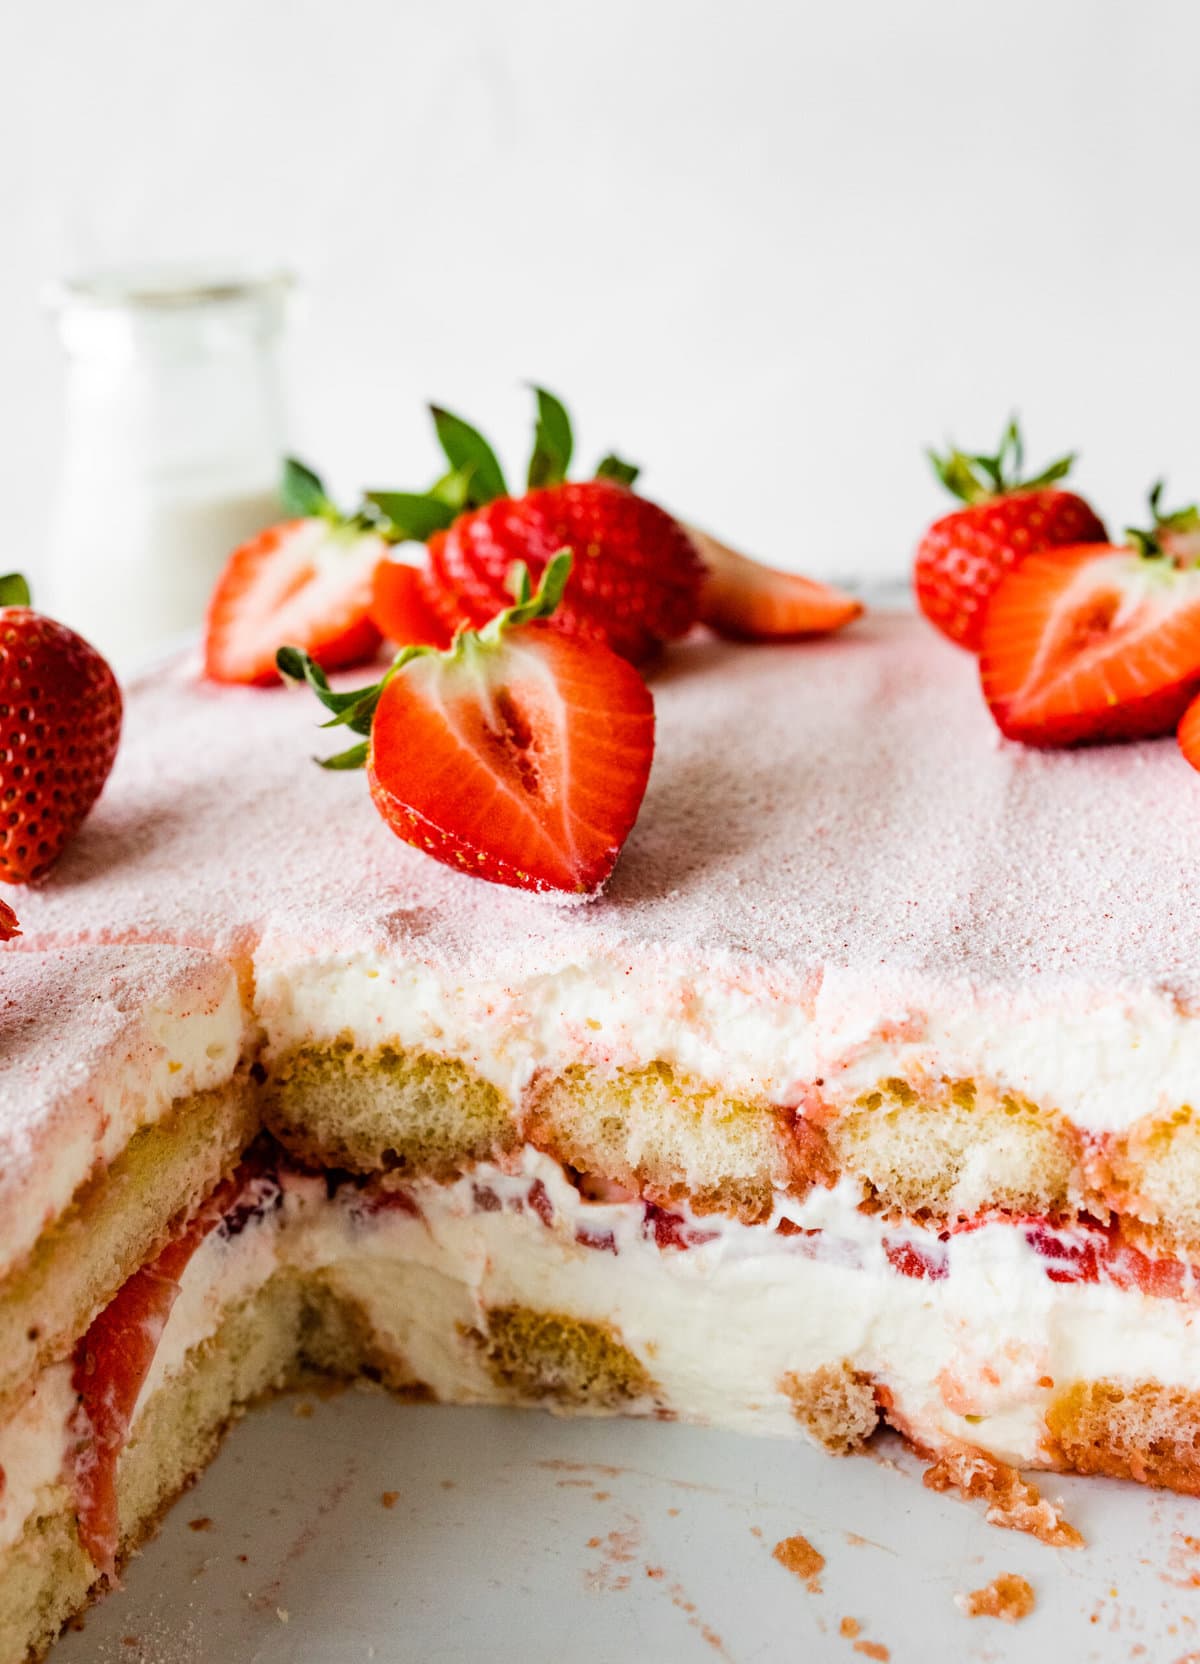 Easy Strawberry tiramisu sliced and cut out the middle to see the layers. Cut strawberries on top.